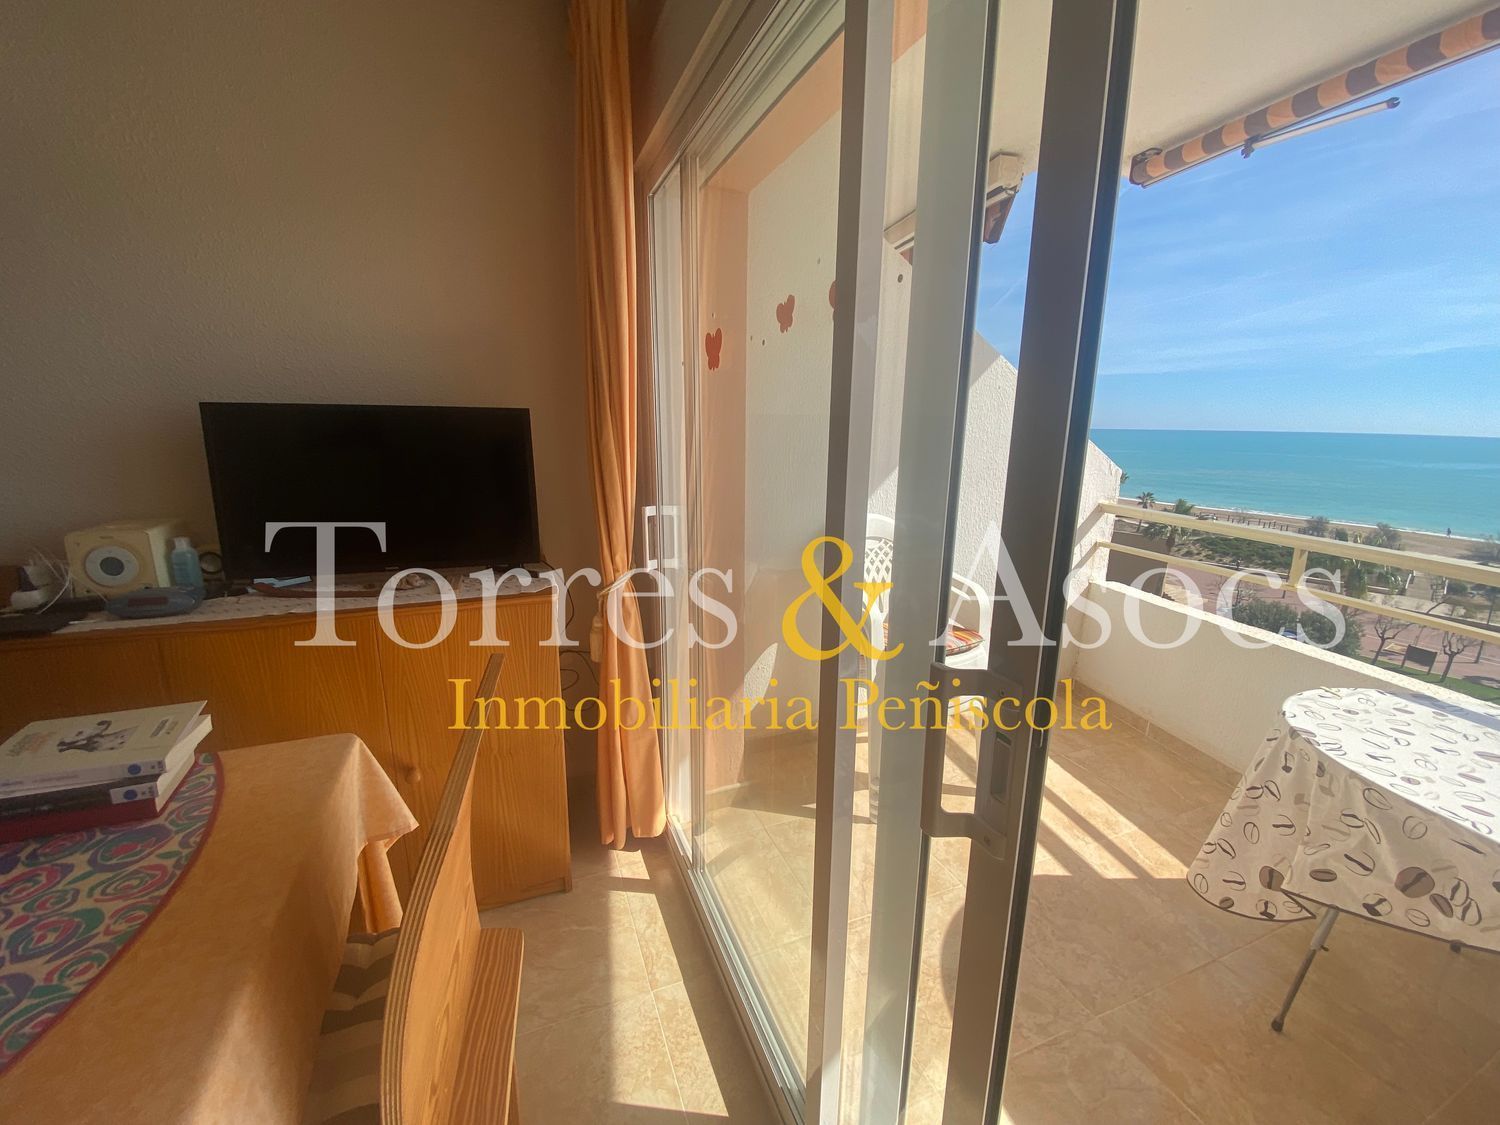 Apartment for sale on the seafront on Valencia Avenue, in Peñiscola